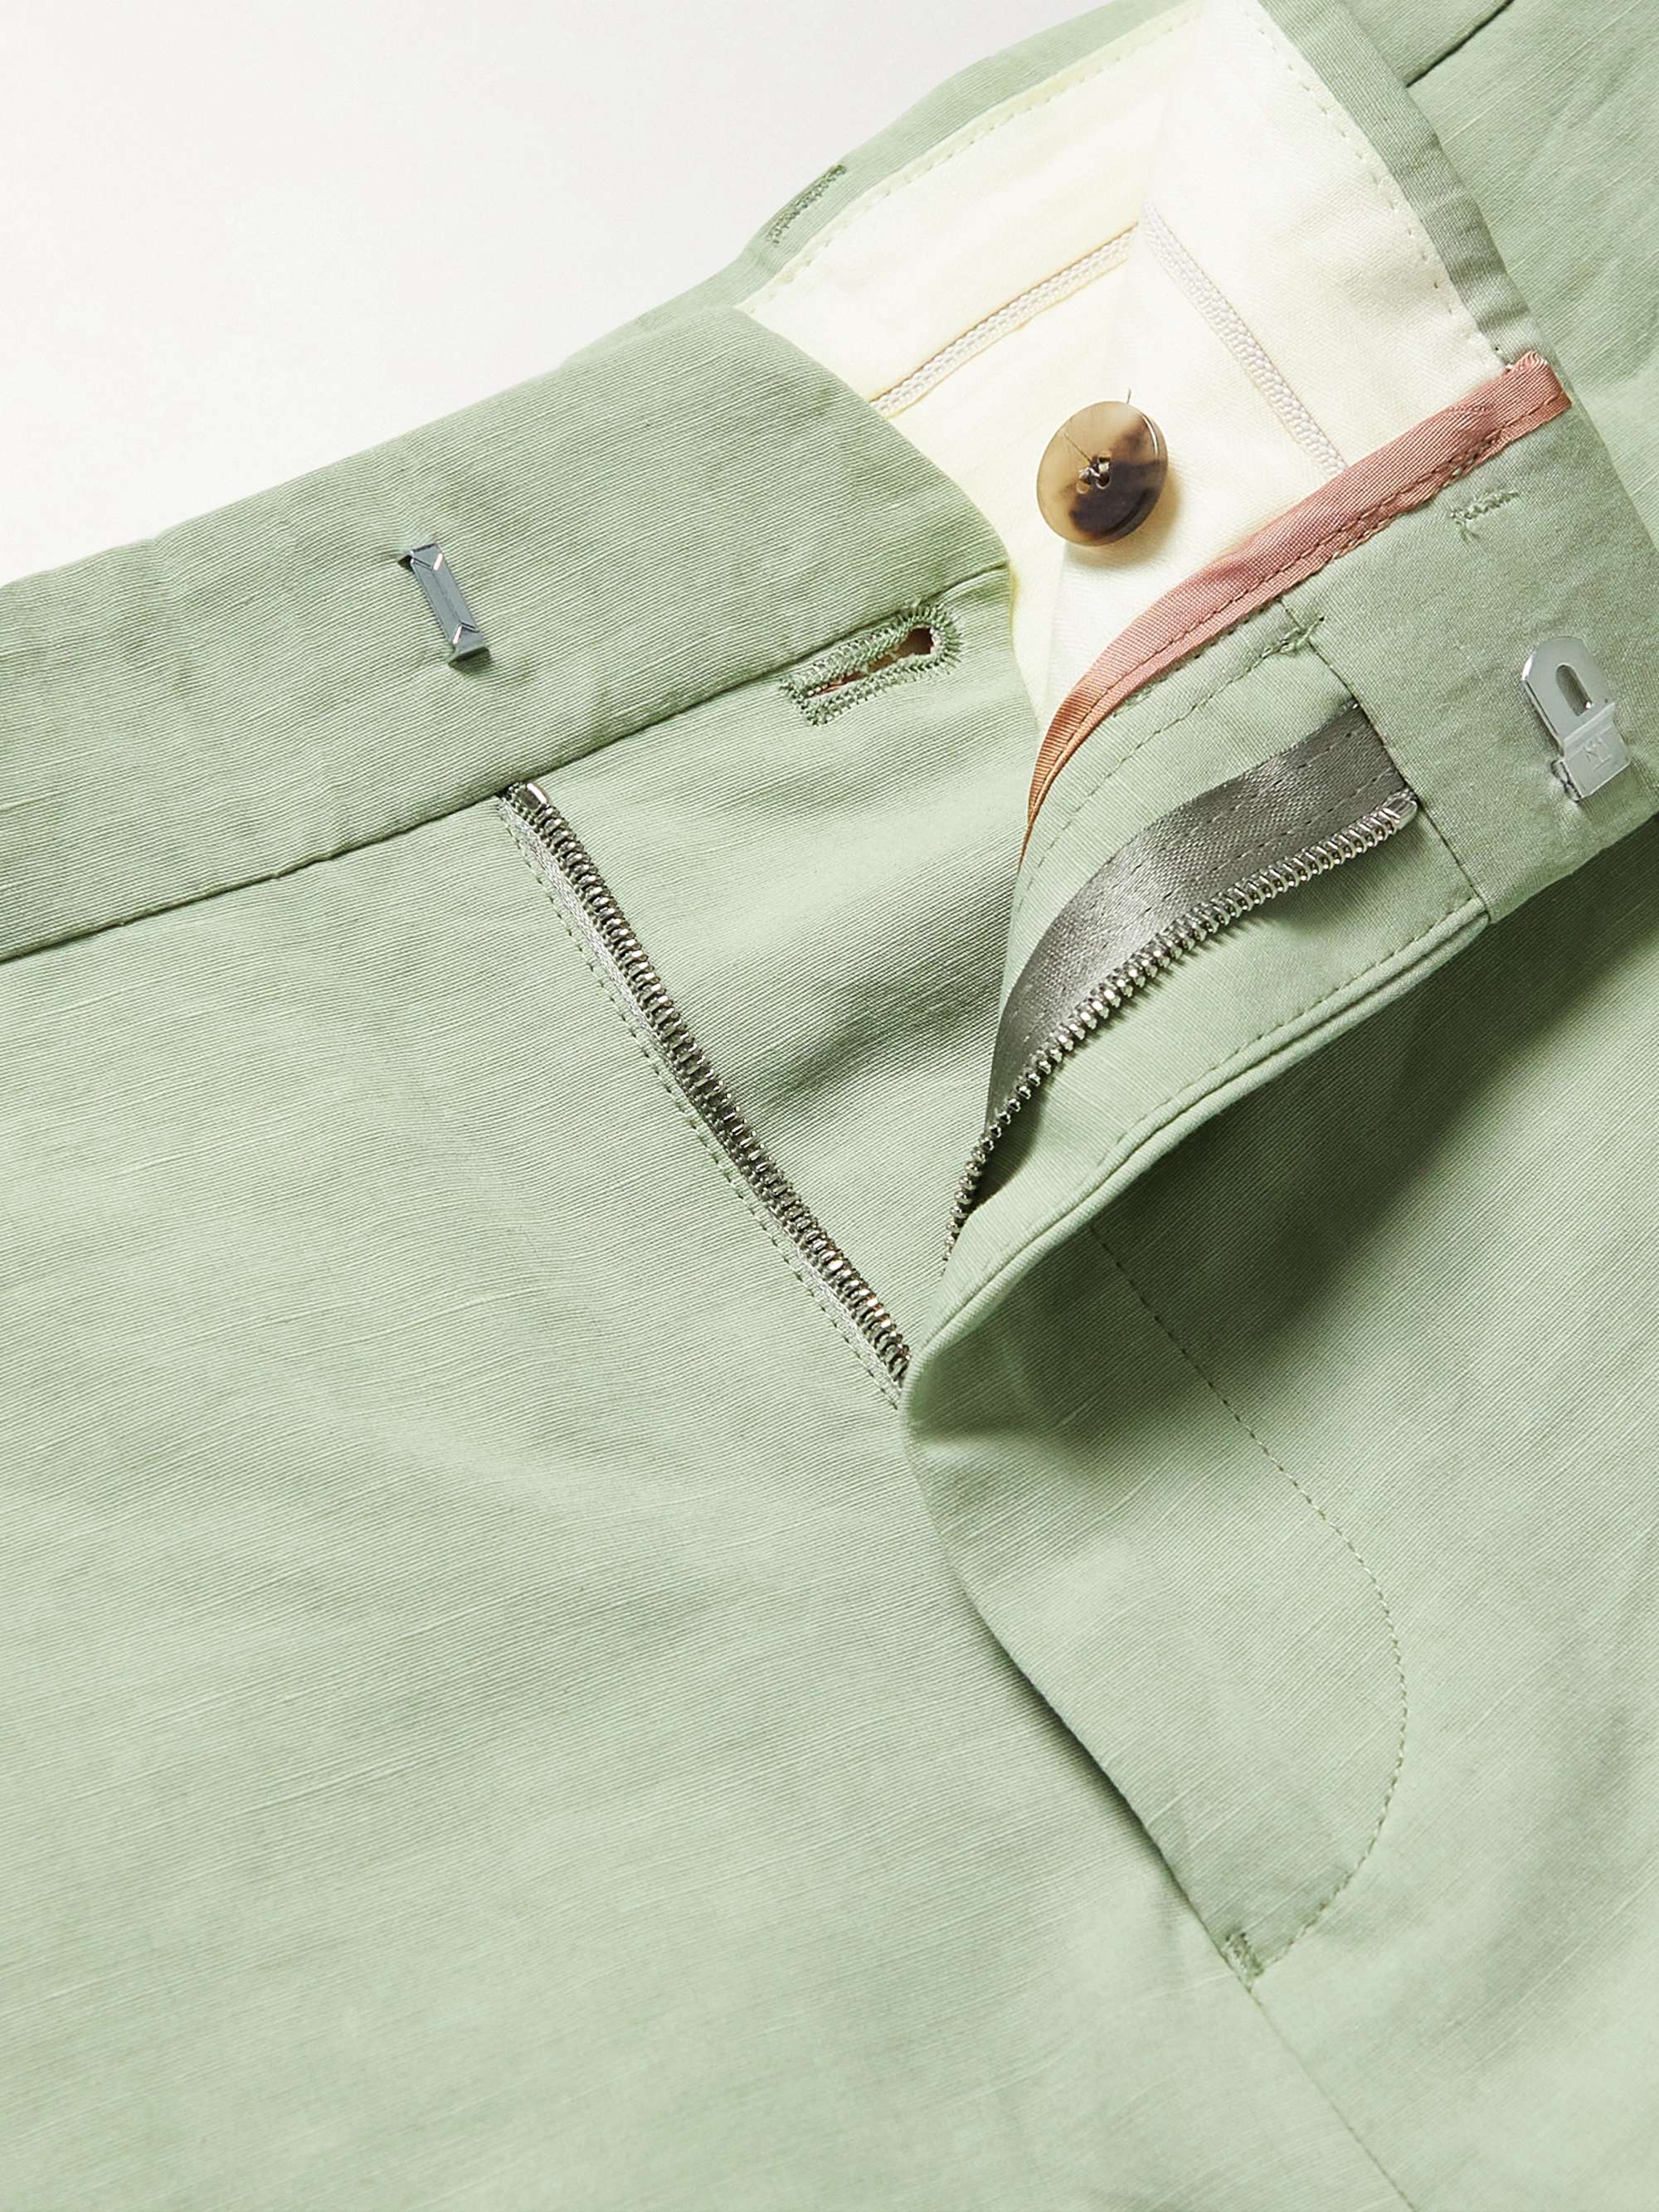 PAUL SMITH Slim-Fit Cotton and Linen-Blend Shorts